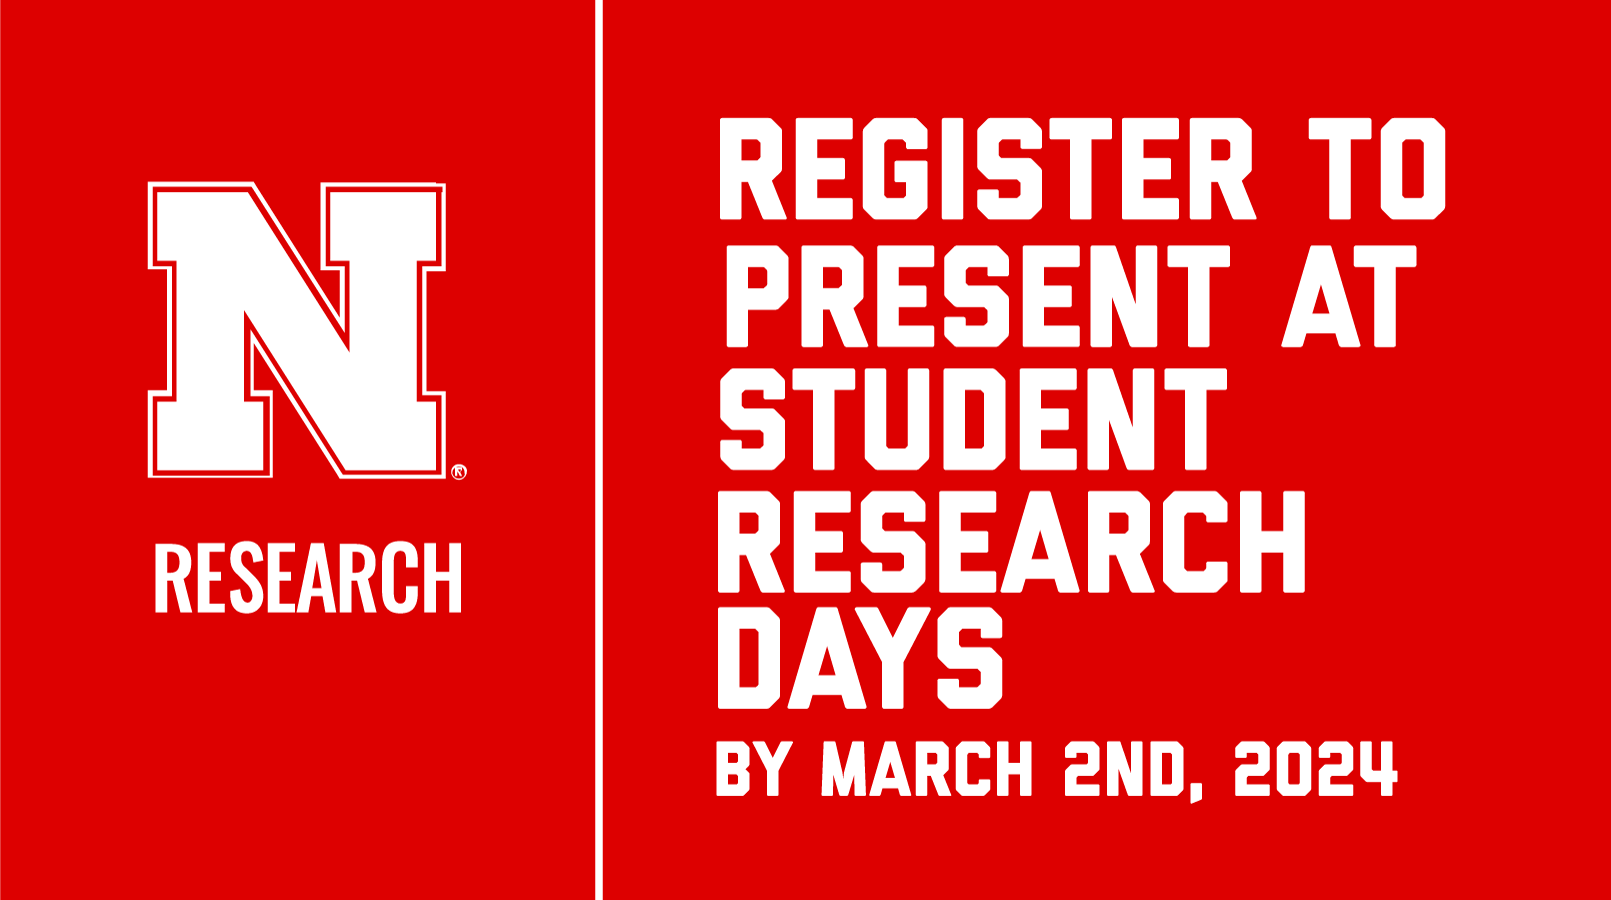 Register to Present at Student Research Days by March 2nd